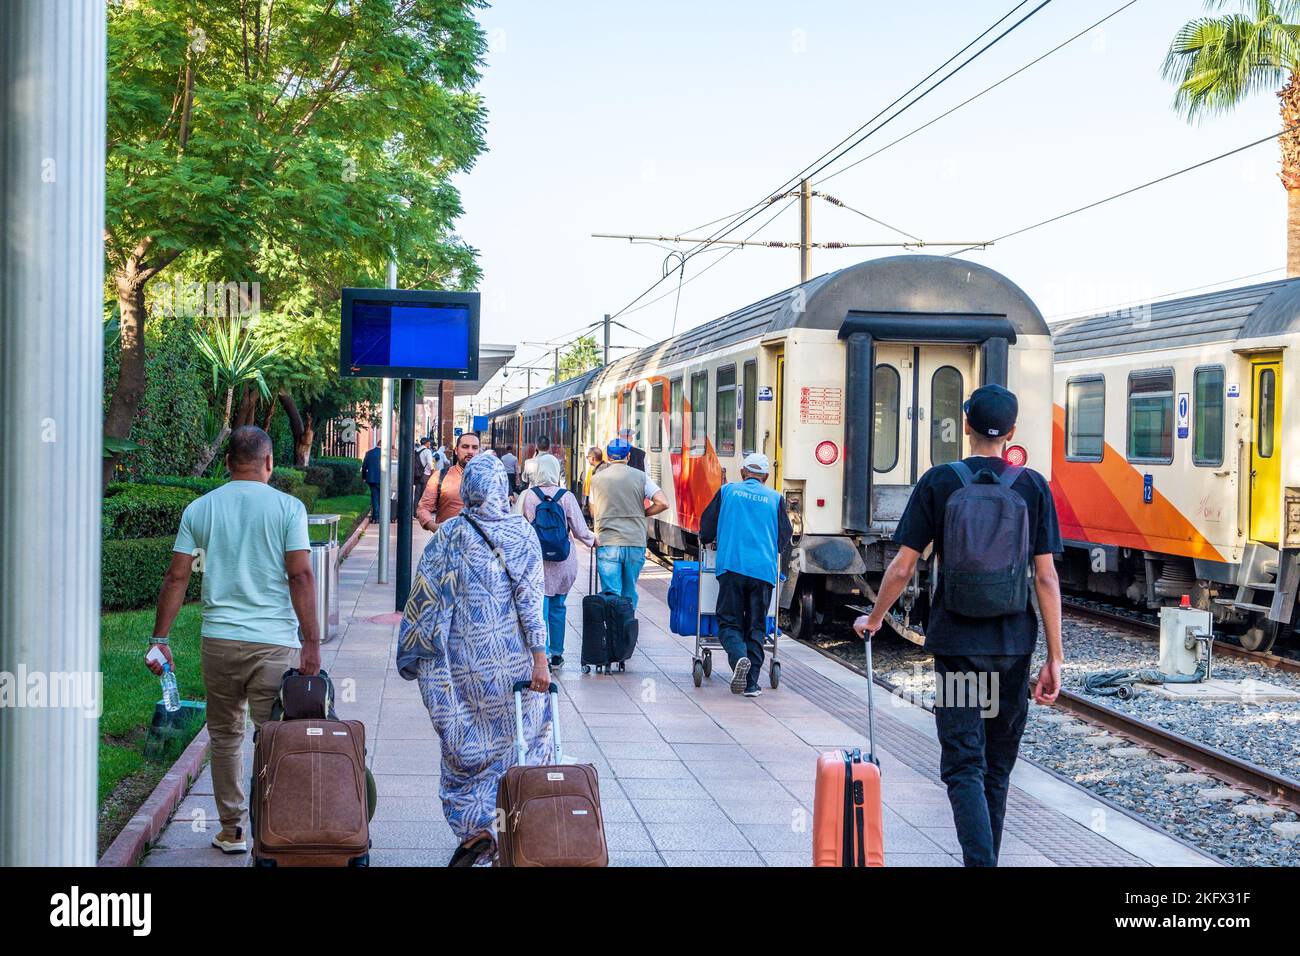 Rail travel in Morocco - passengers about to board a train at Marrakech railway station Stock Photo